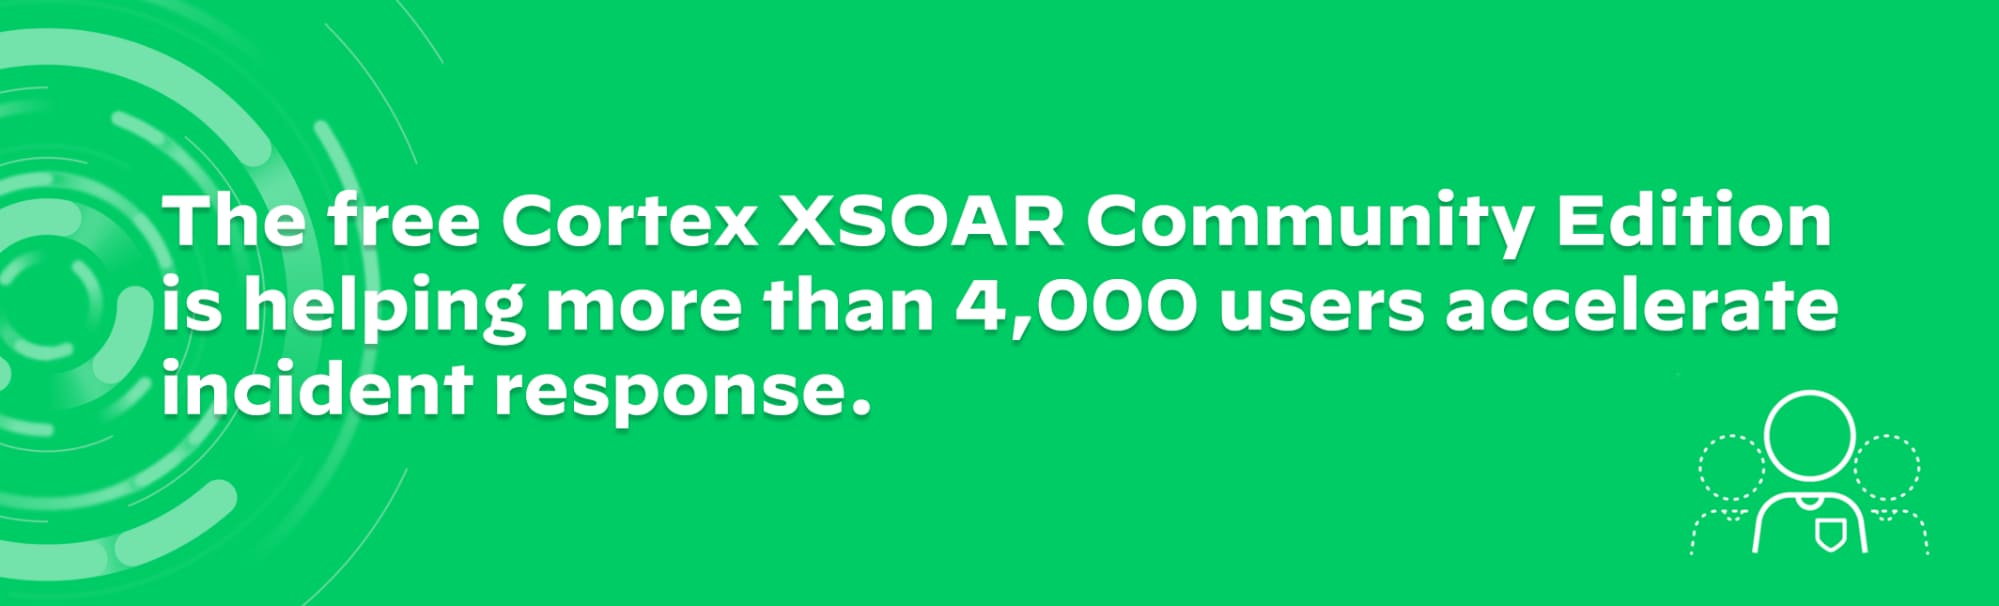 The free Cortex XSOAR Community Edition is helping more than 4,000 users accelerate incident response.